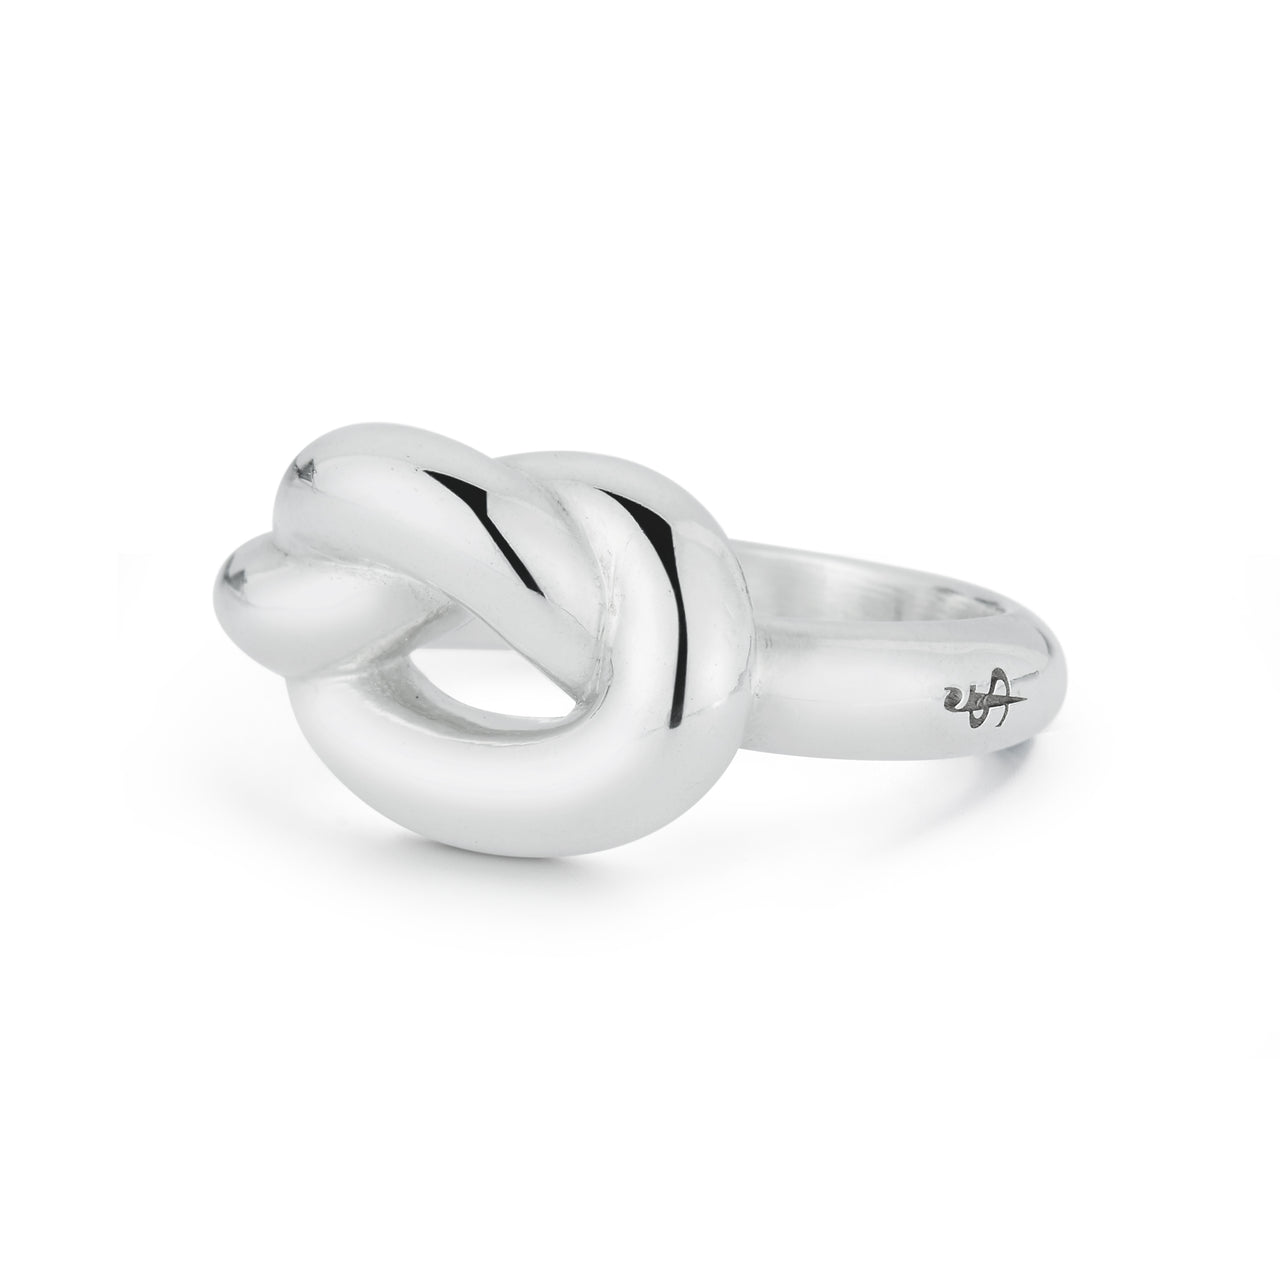 high polished solid sterling silver cocktail statement love knot ring by finn by candice pool neistat